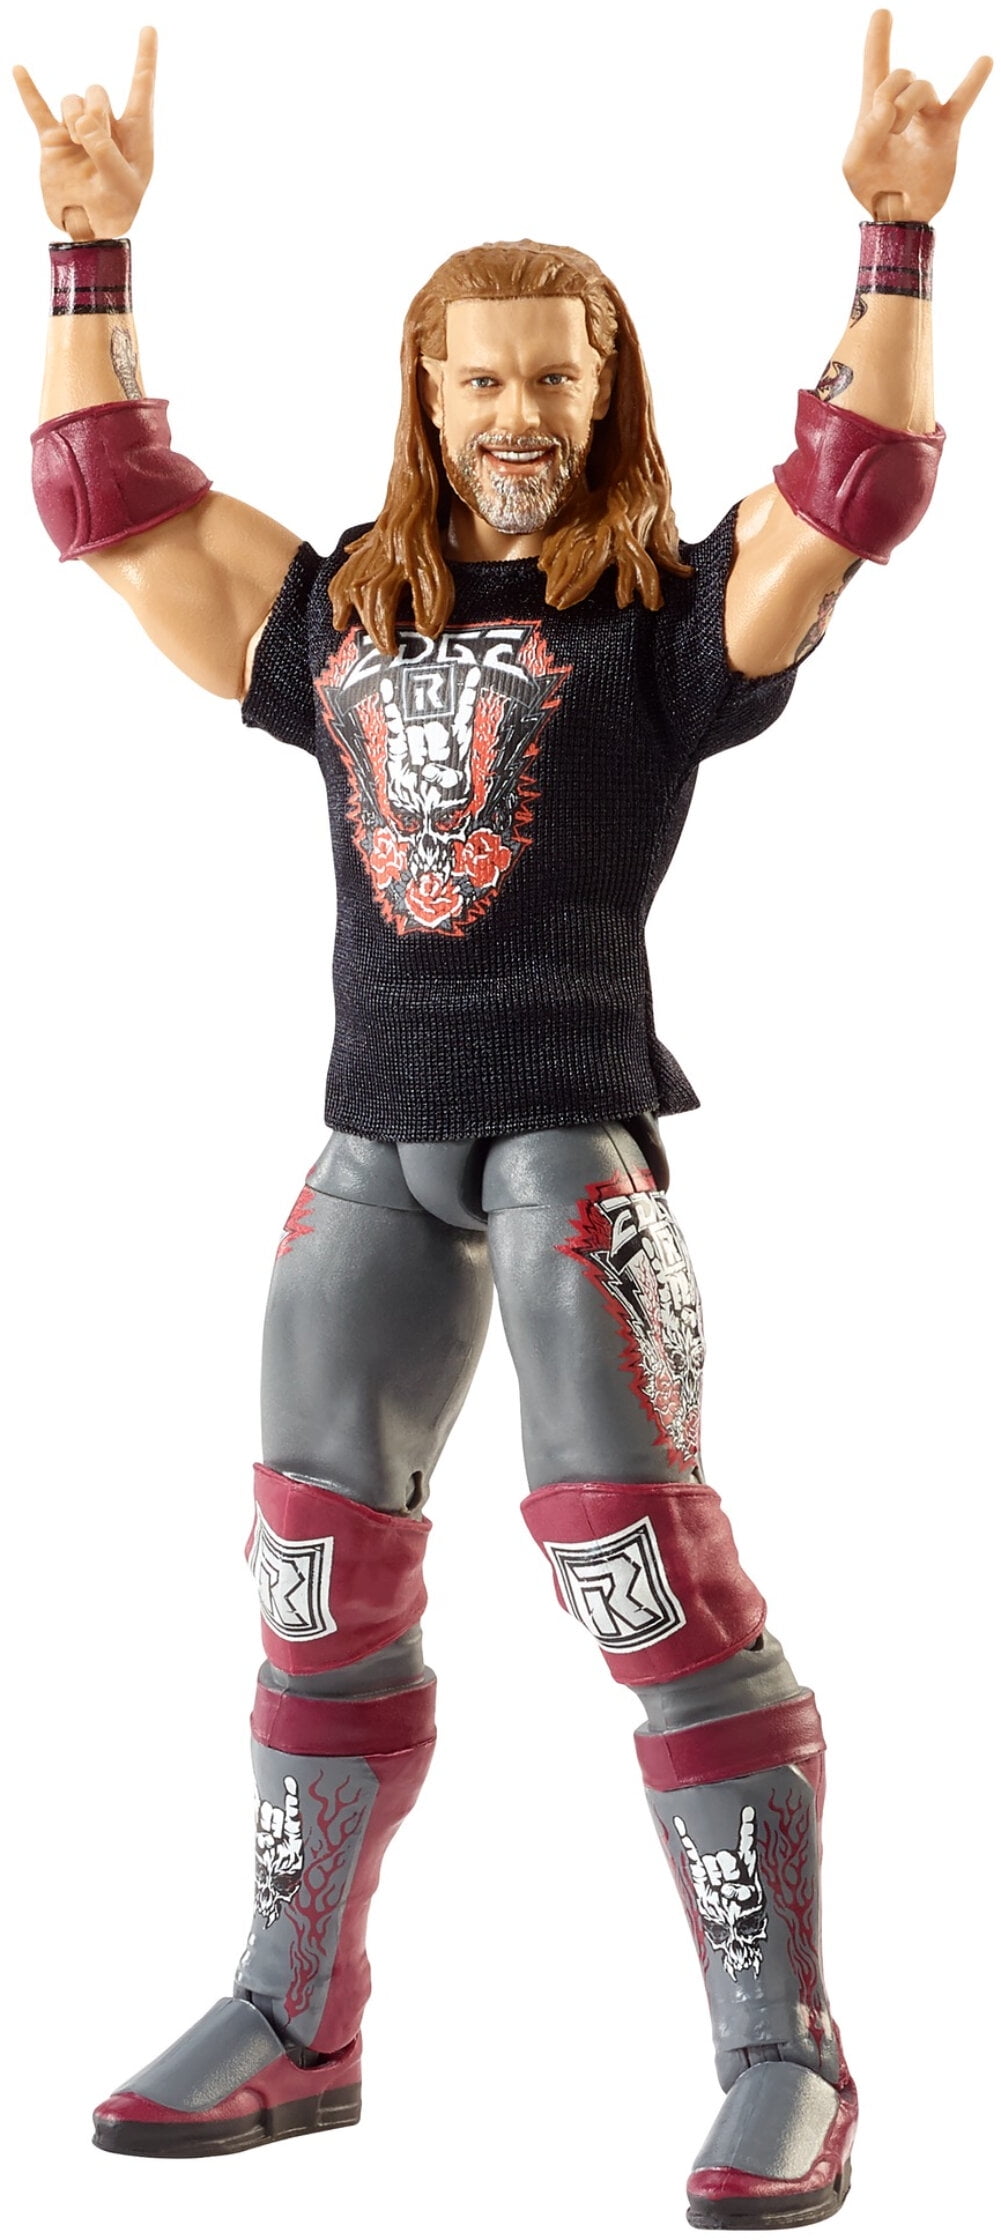 Details about   WWE Elite The Fiend Bray Wyatt Ultimate Edition Action Figure NEW 2020 IN HAND 